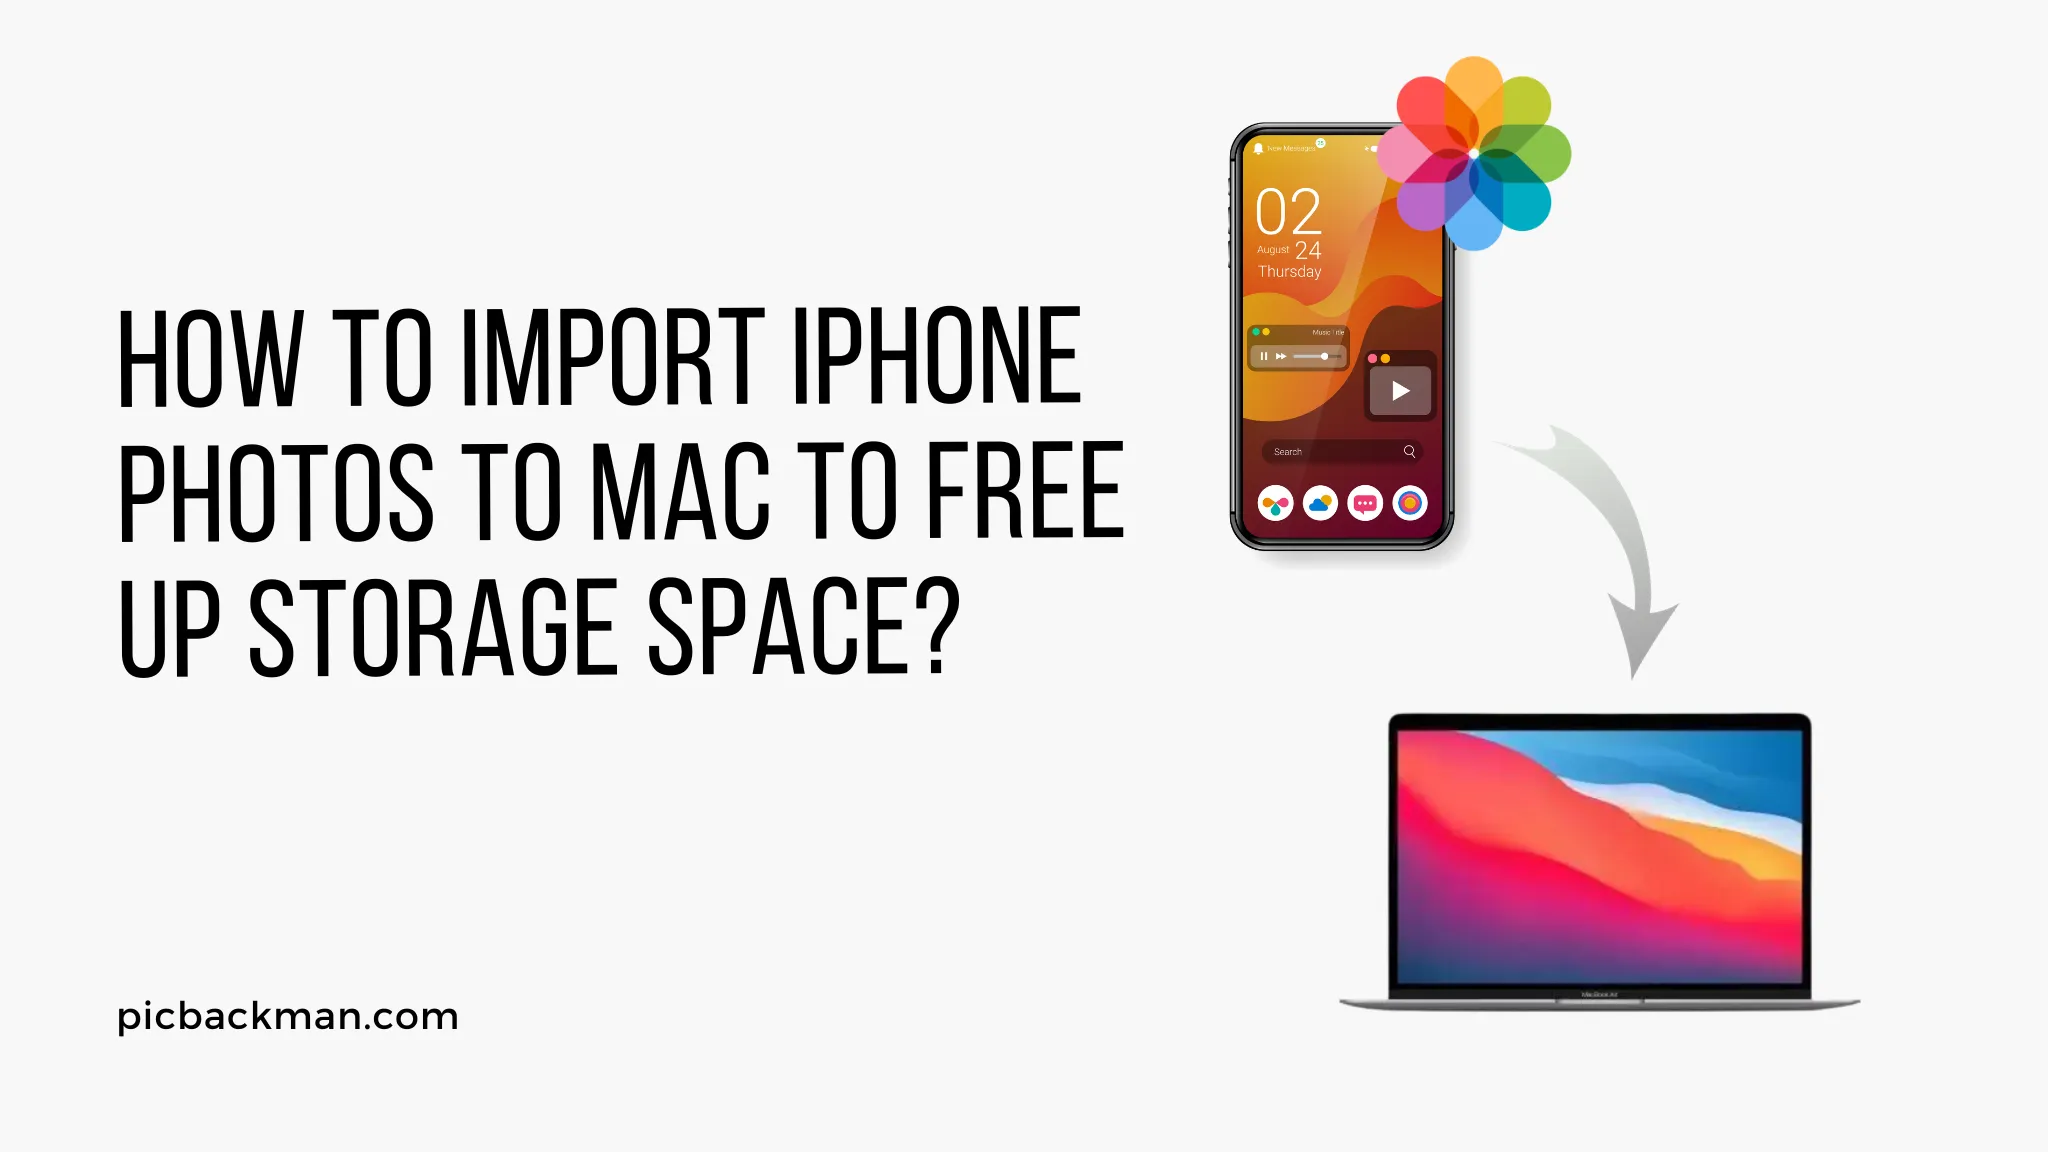 How to import iPhone photos to Mac to free up storage space